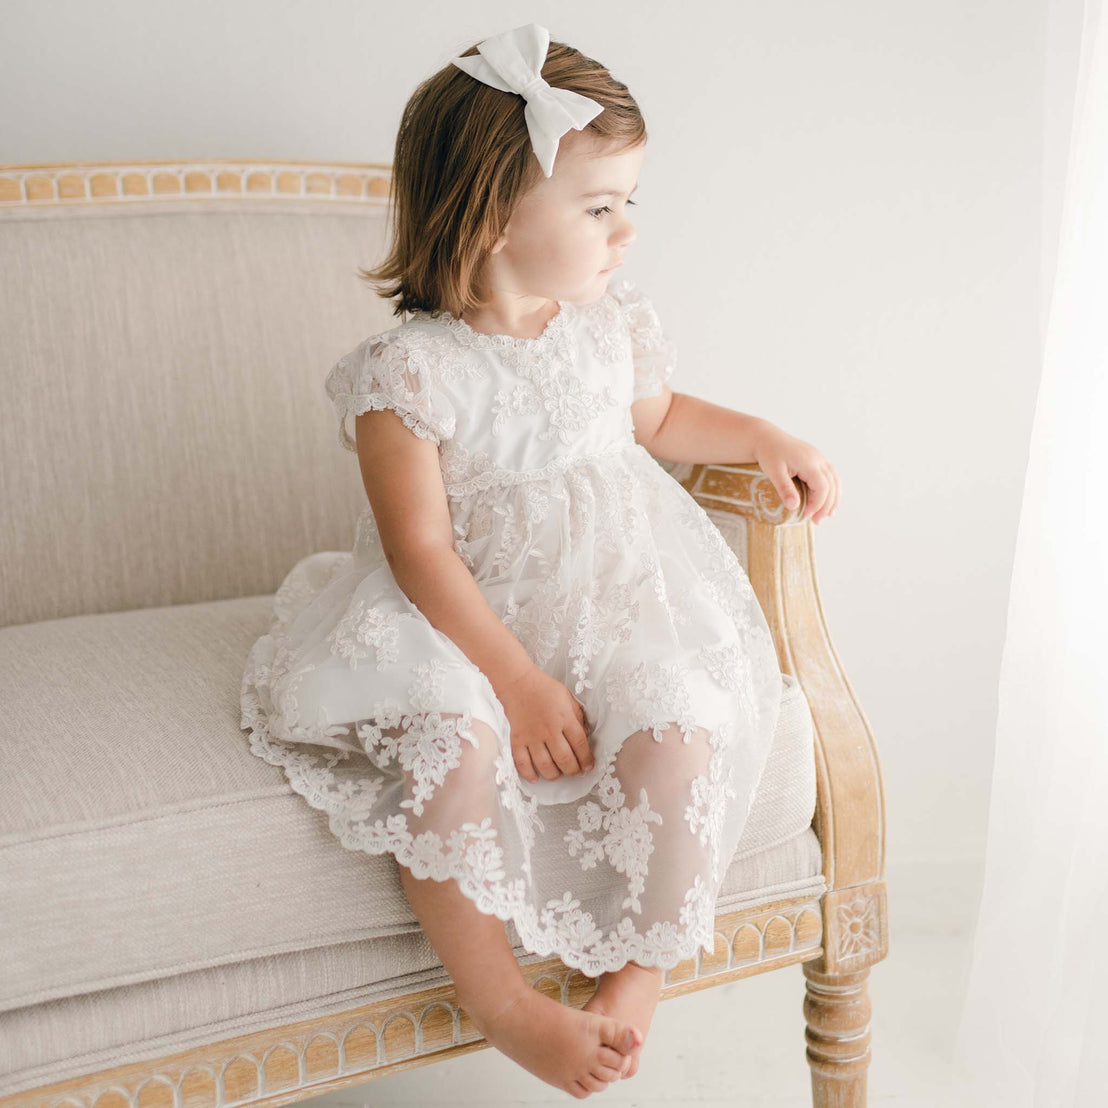 Baby girl sitting on chair wearing her beautiful lace christening dress. 